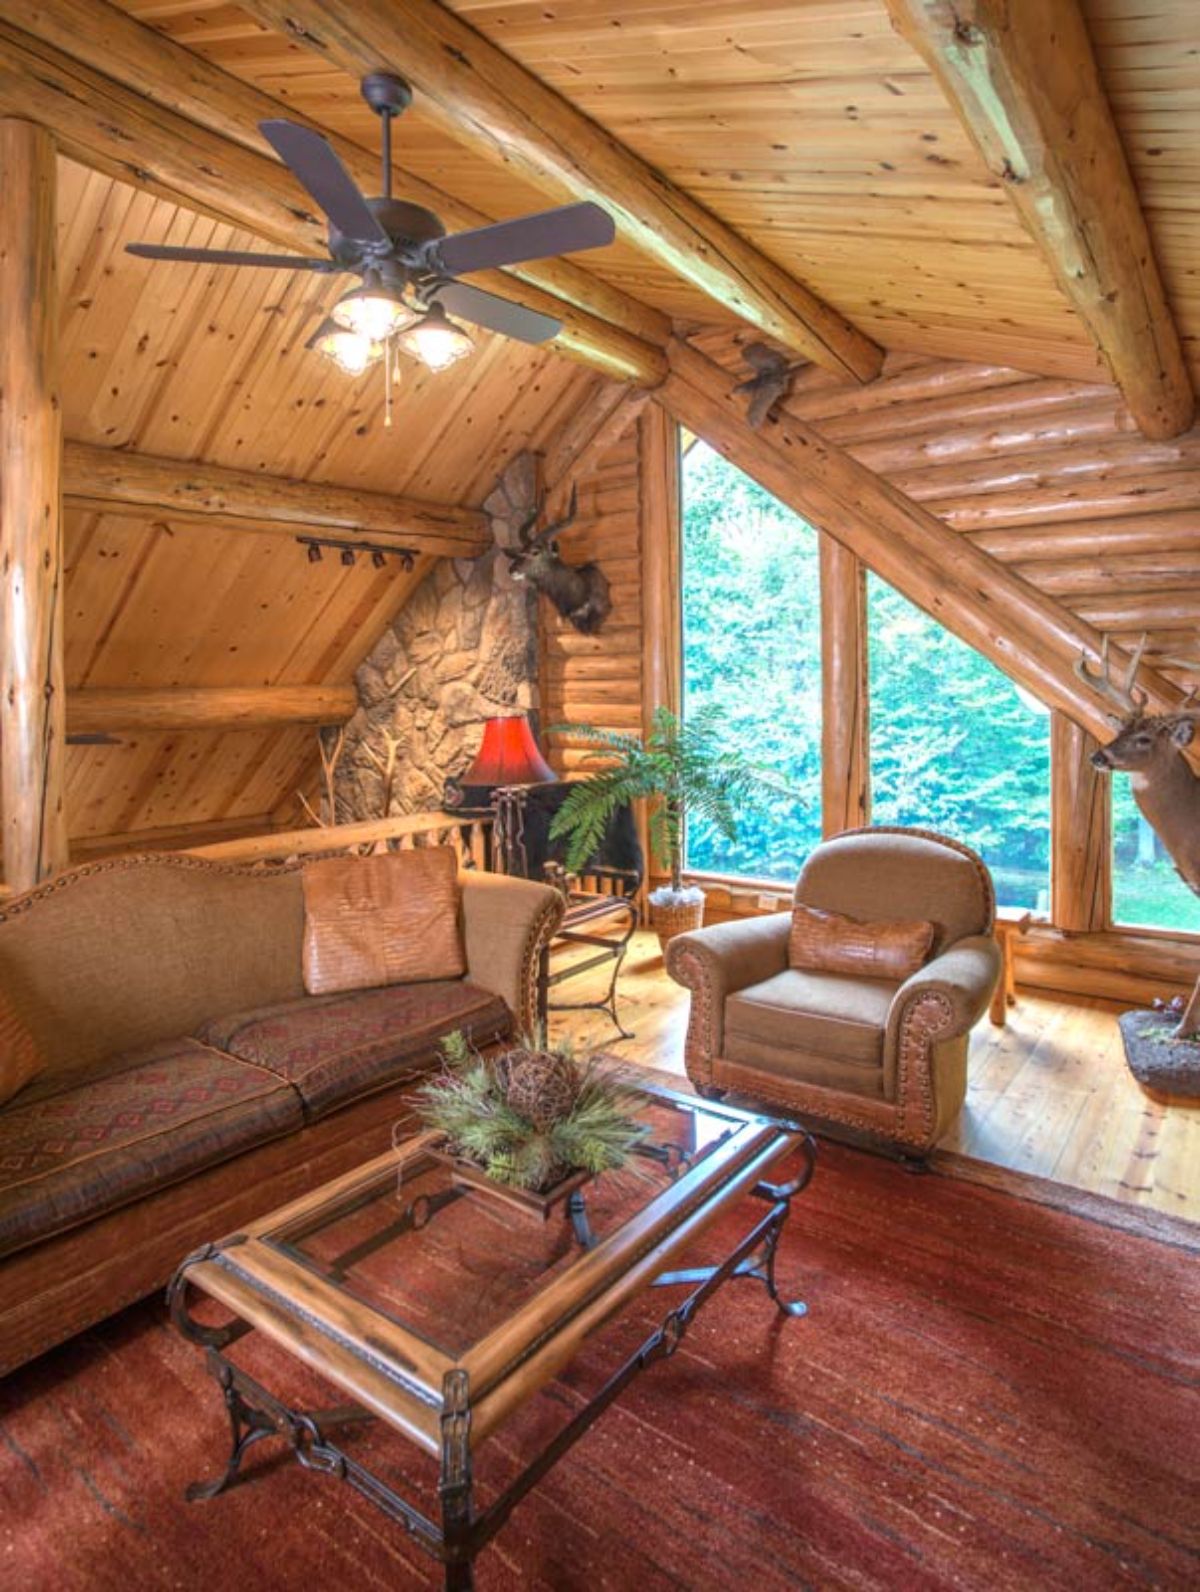 chair in front of trapezoid windows against log cabin wall